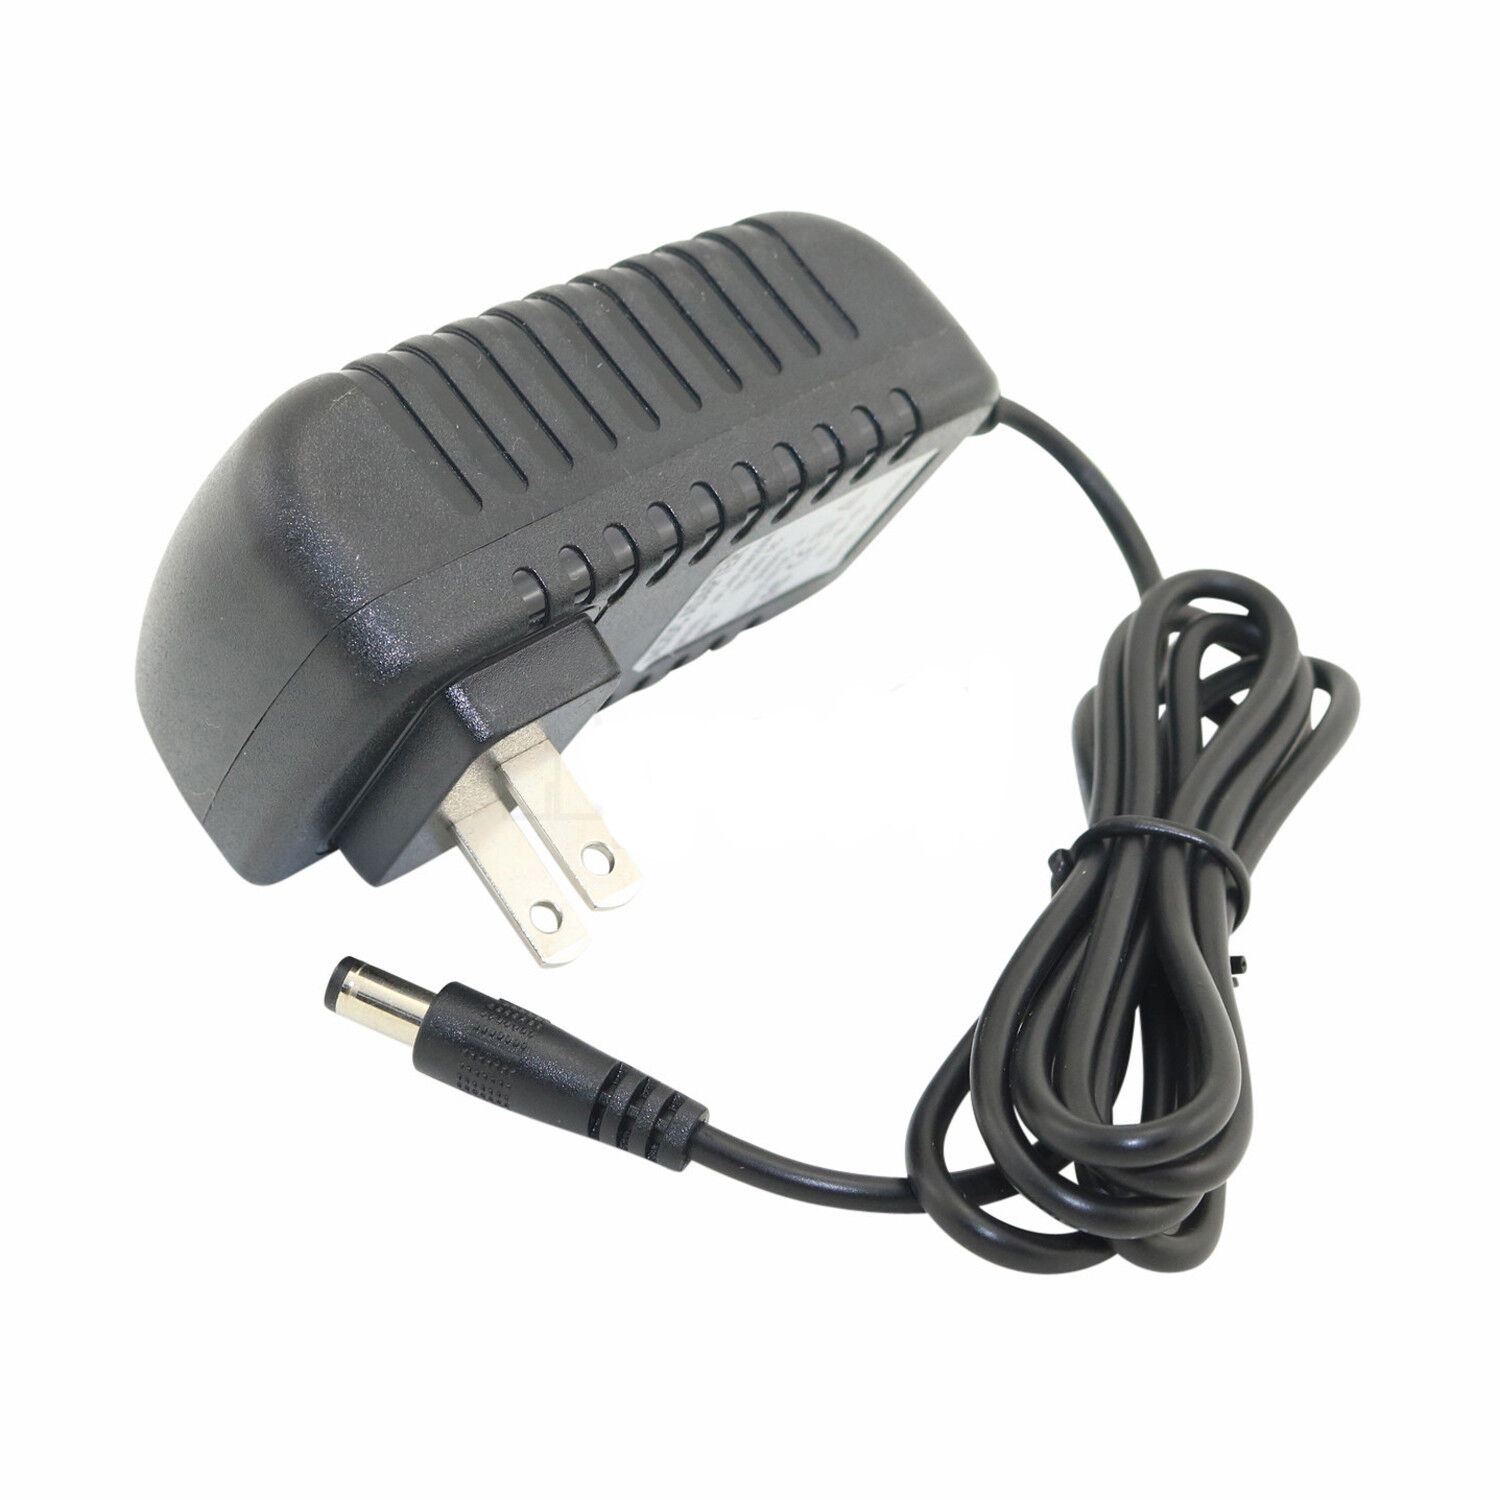 RS-AB015J00 AC Adapter (12 Volt, 1500mA, 1.5m Cable) Type AC Adapter Color Black Connector A 5.5mm Male Cable Length 1.